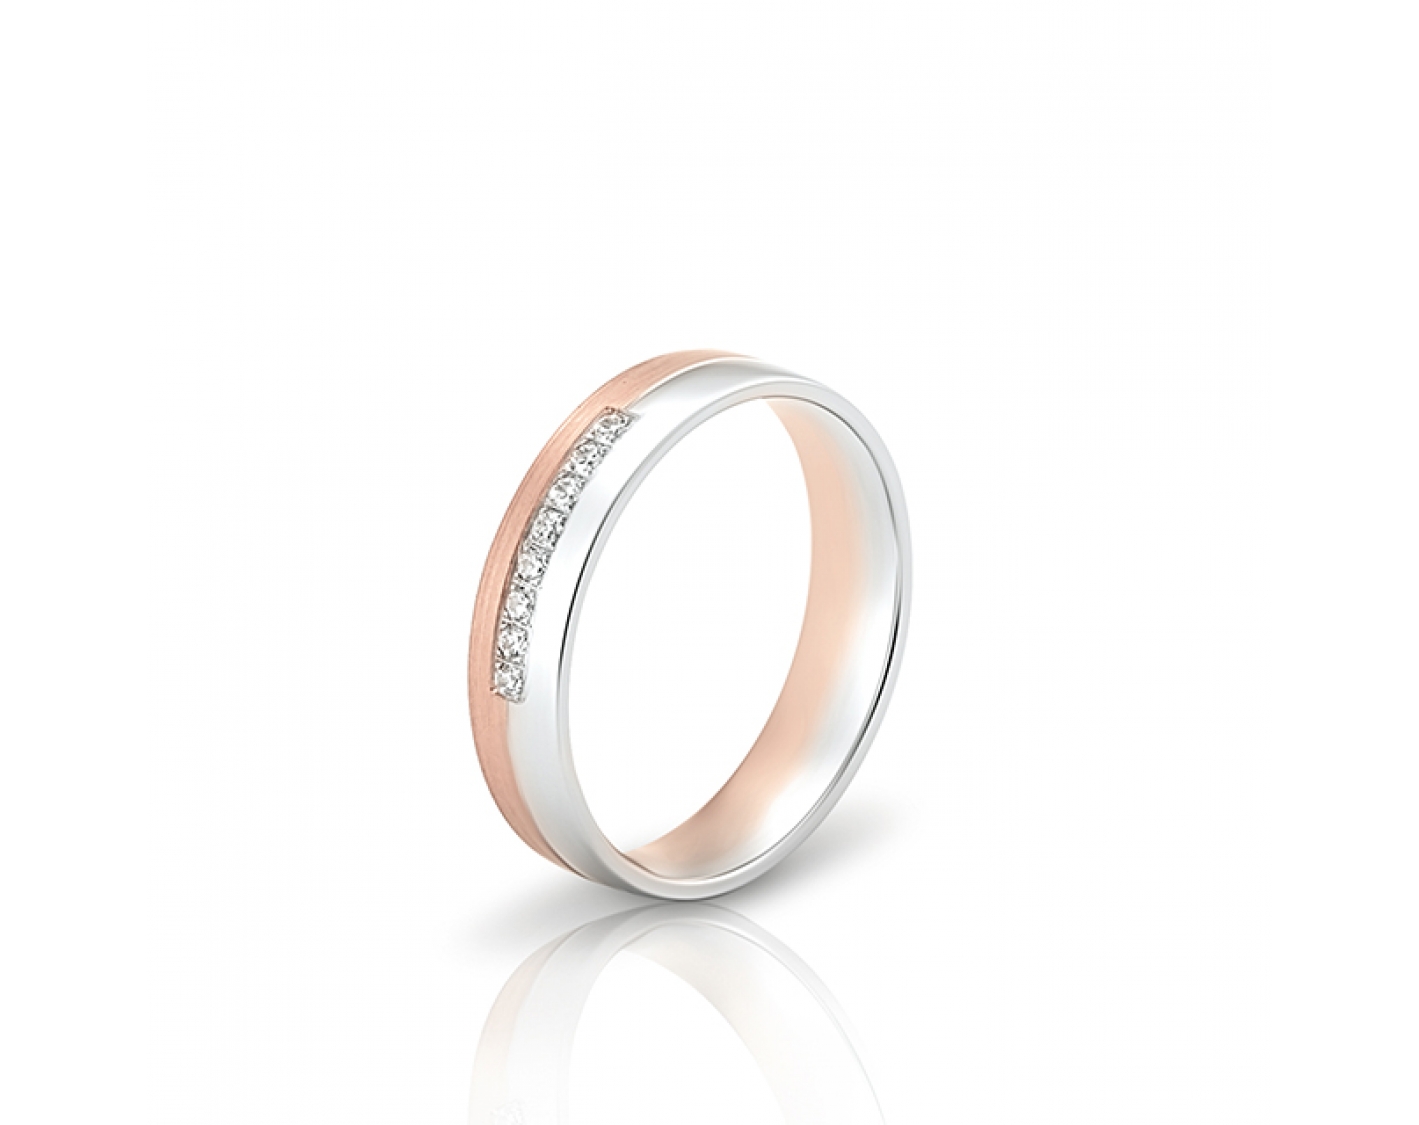 dual-tone 4,5mm two-toned* wedding band with diamonds Photos & images